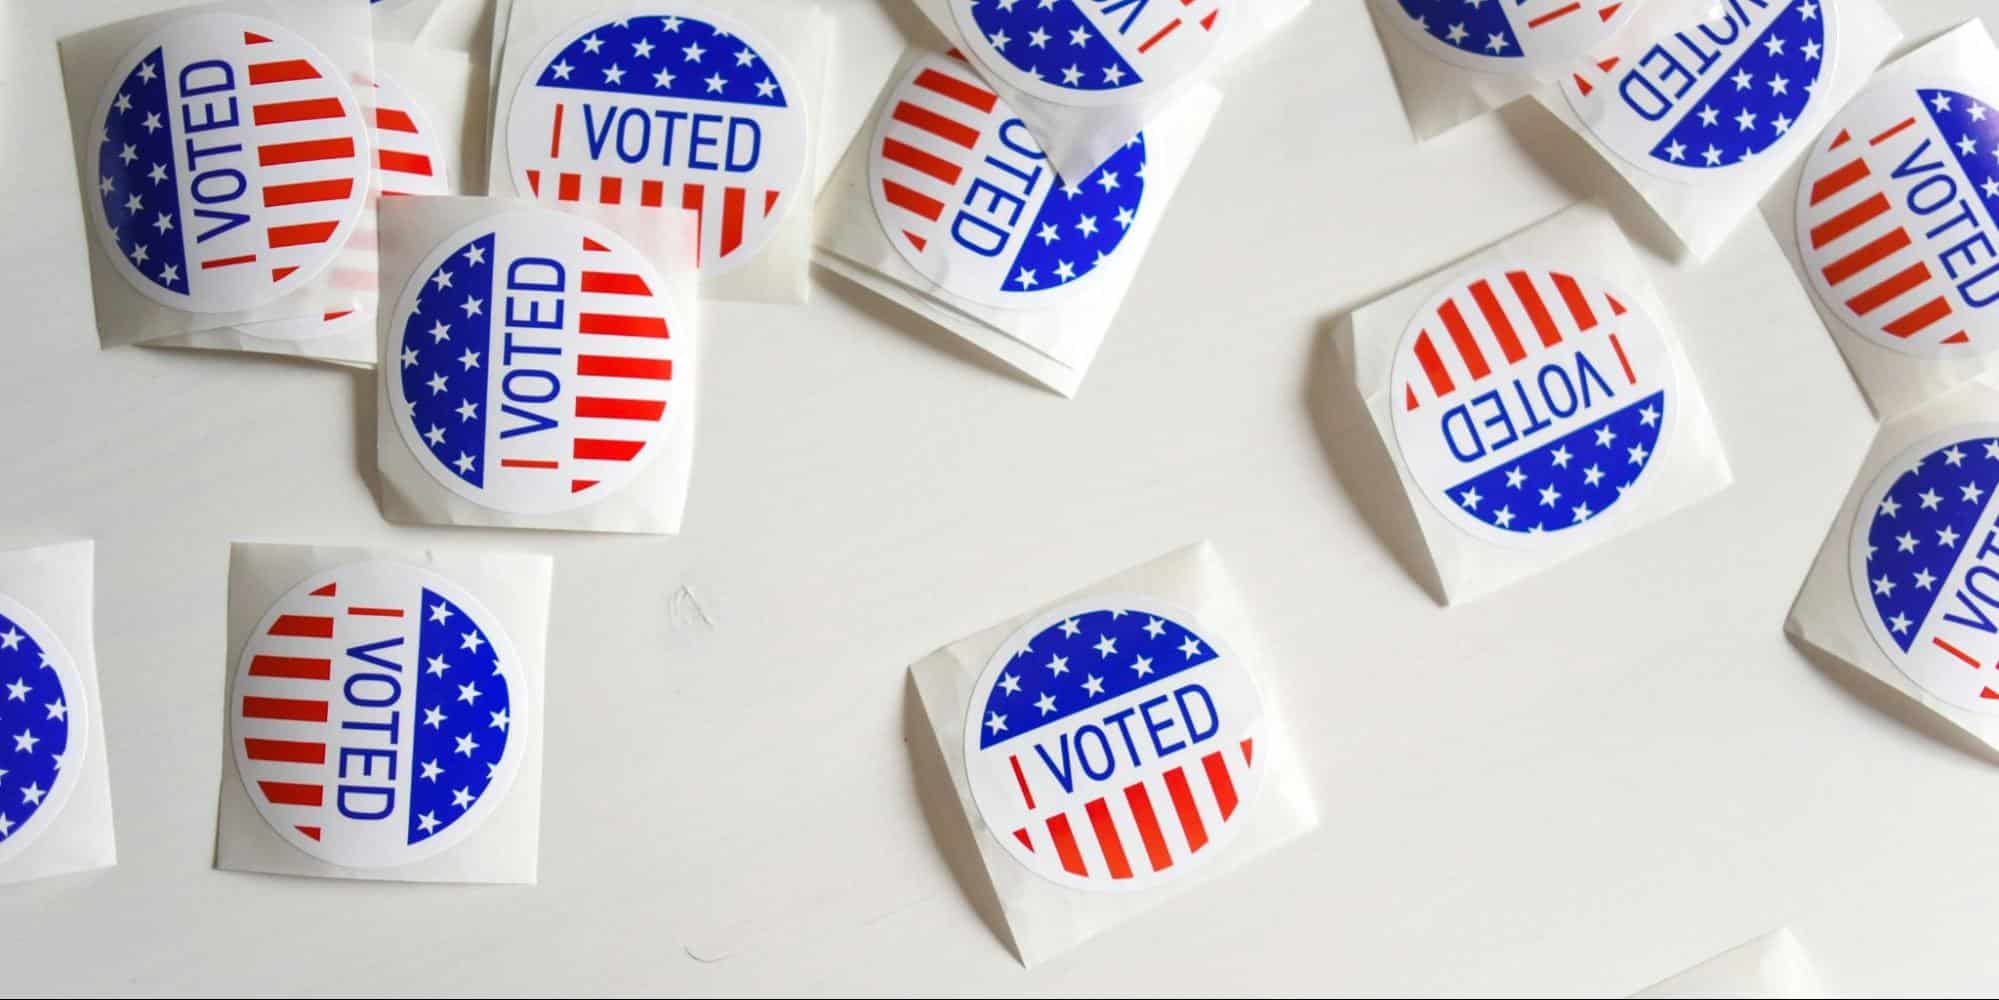 Voting Trends: What's Shaping Modern Elections?